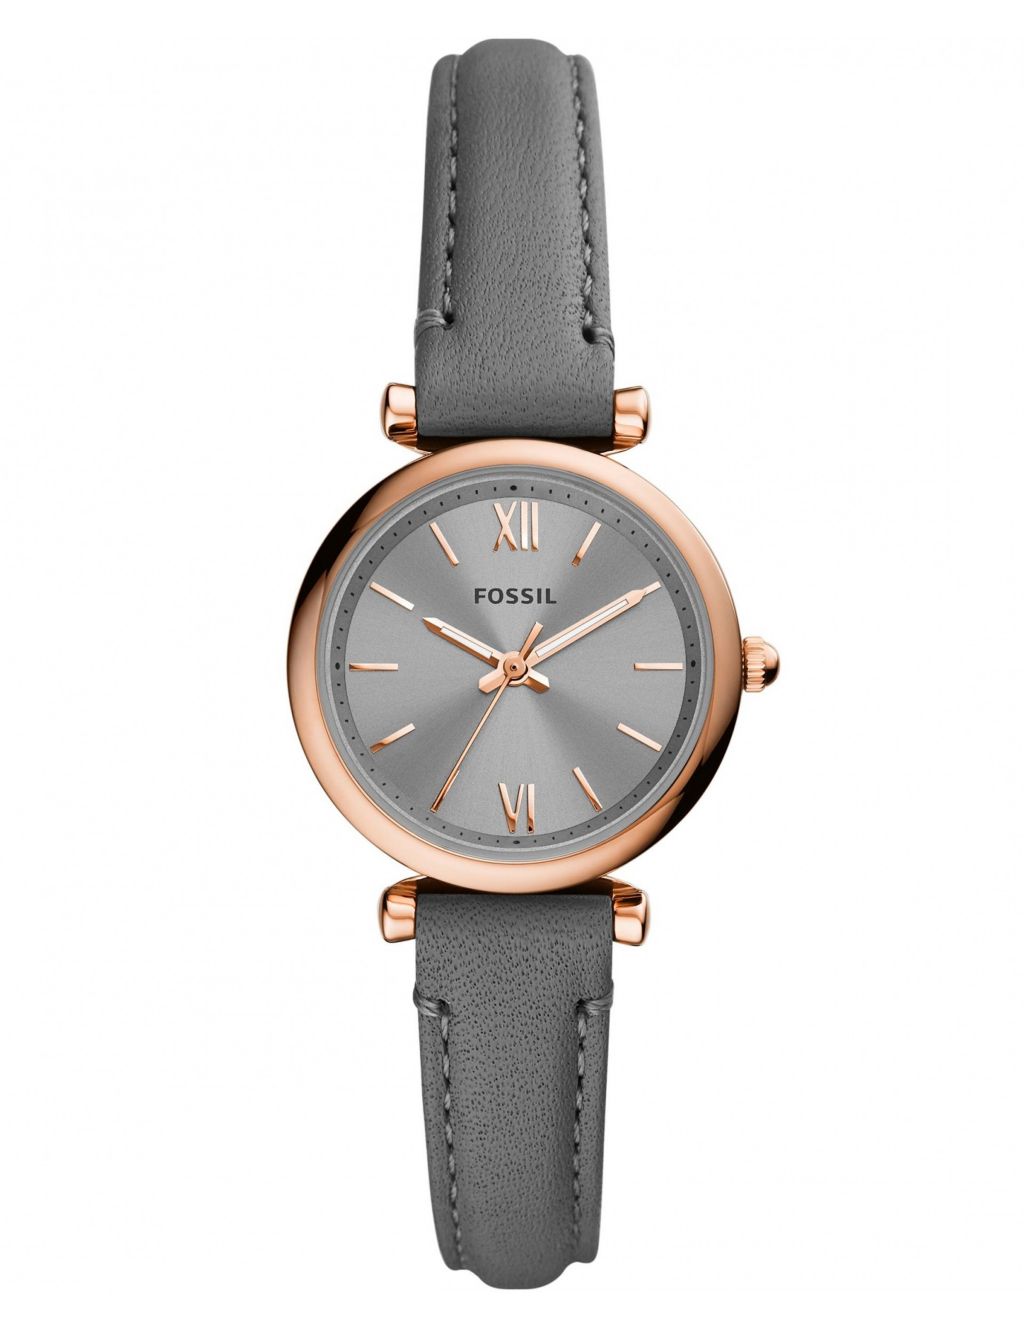 Fossil Carlie Grey Leather Watch image 1